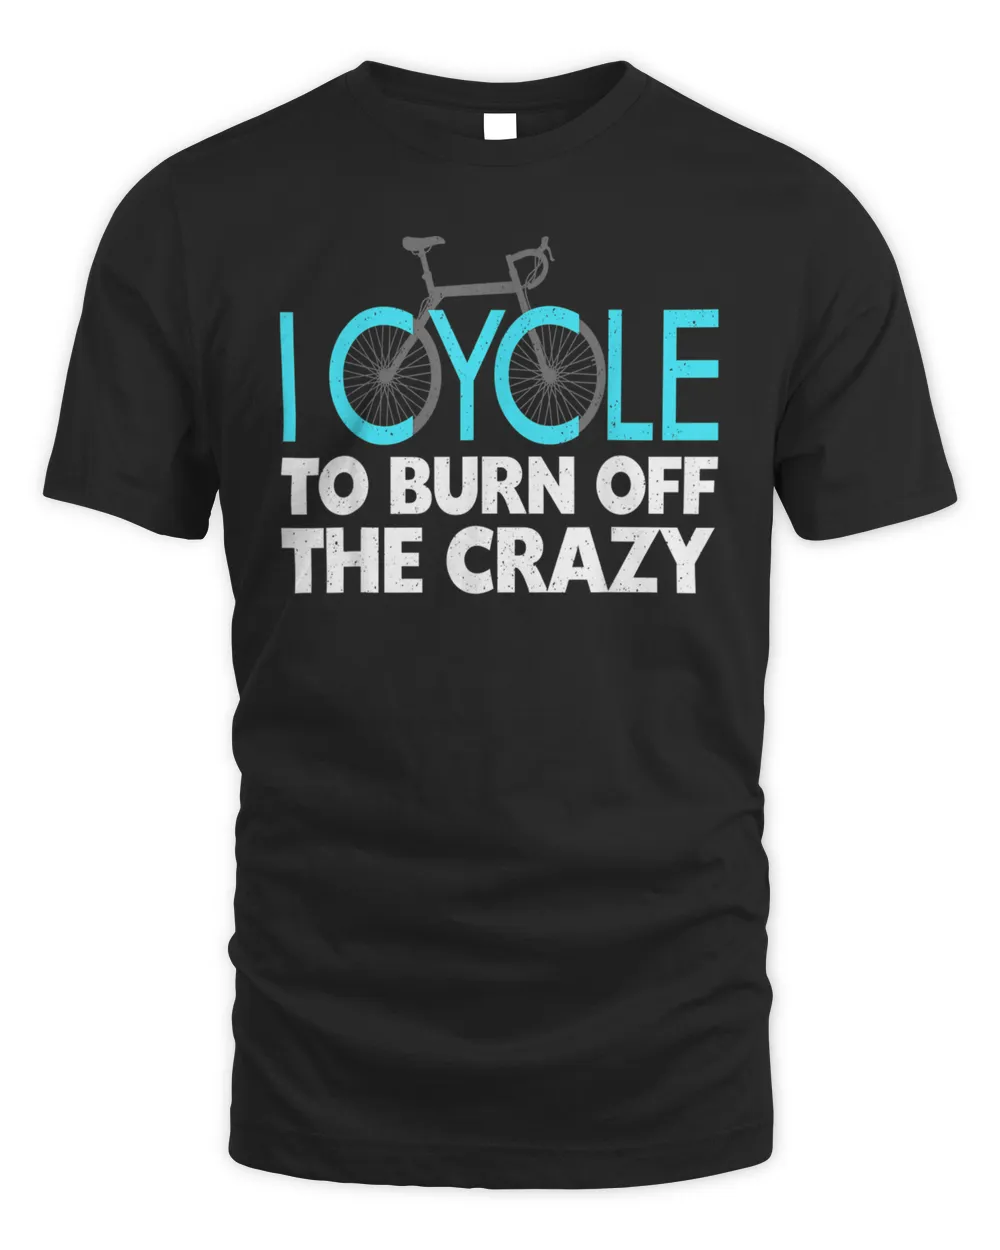 I cycle to burn off crazy